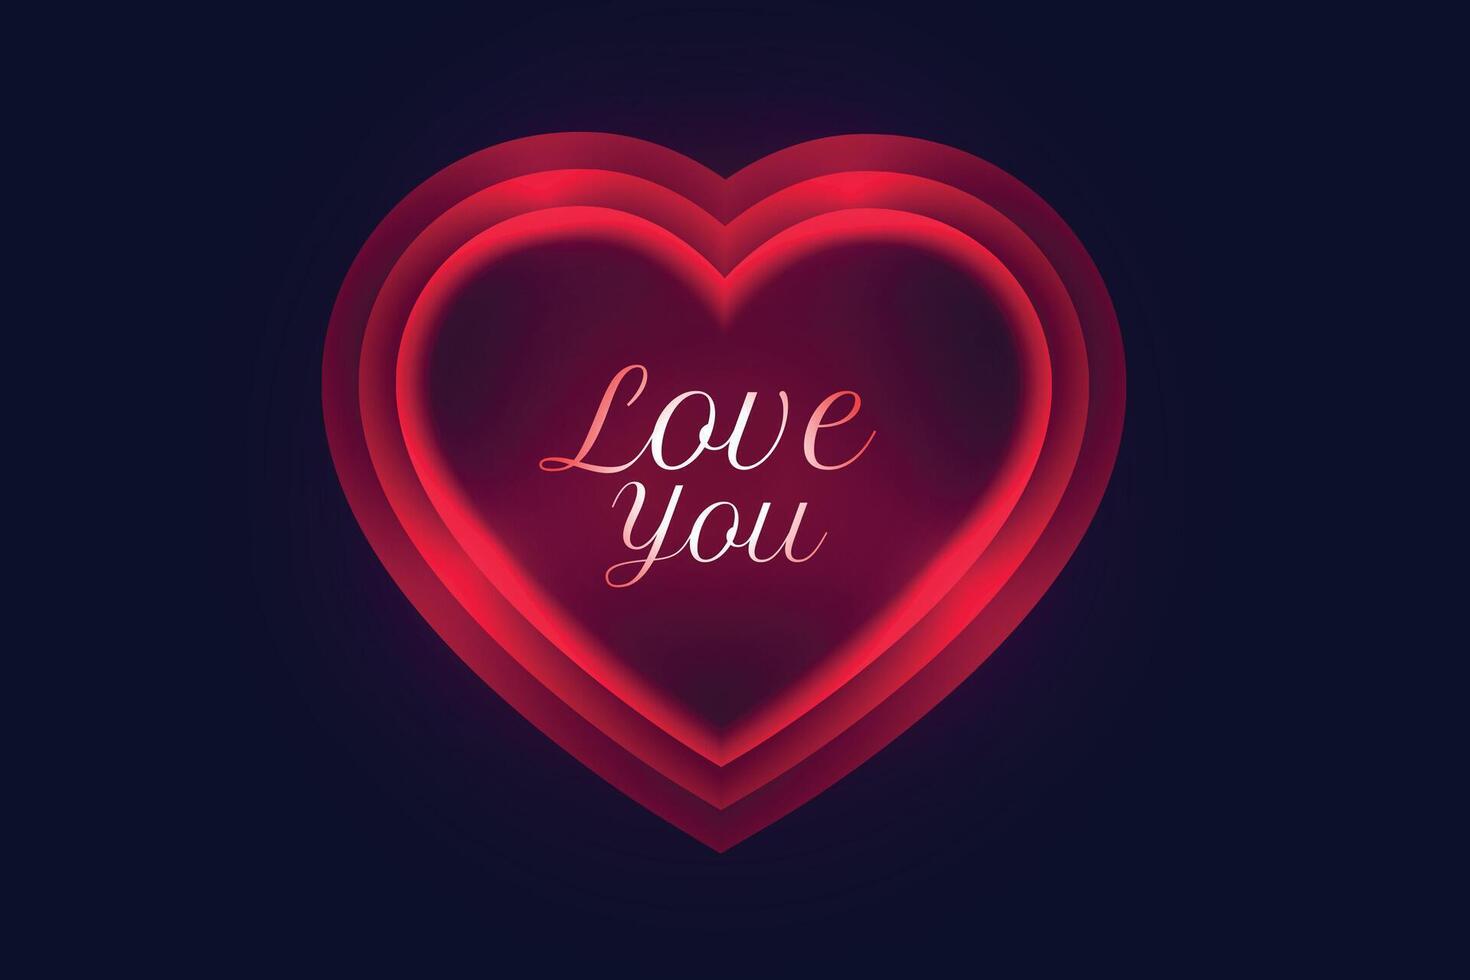 love you message in glowing red neon hearts background vector